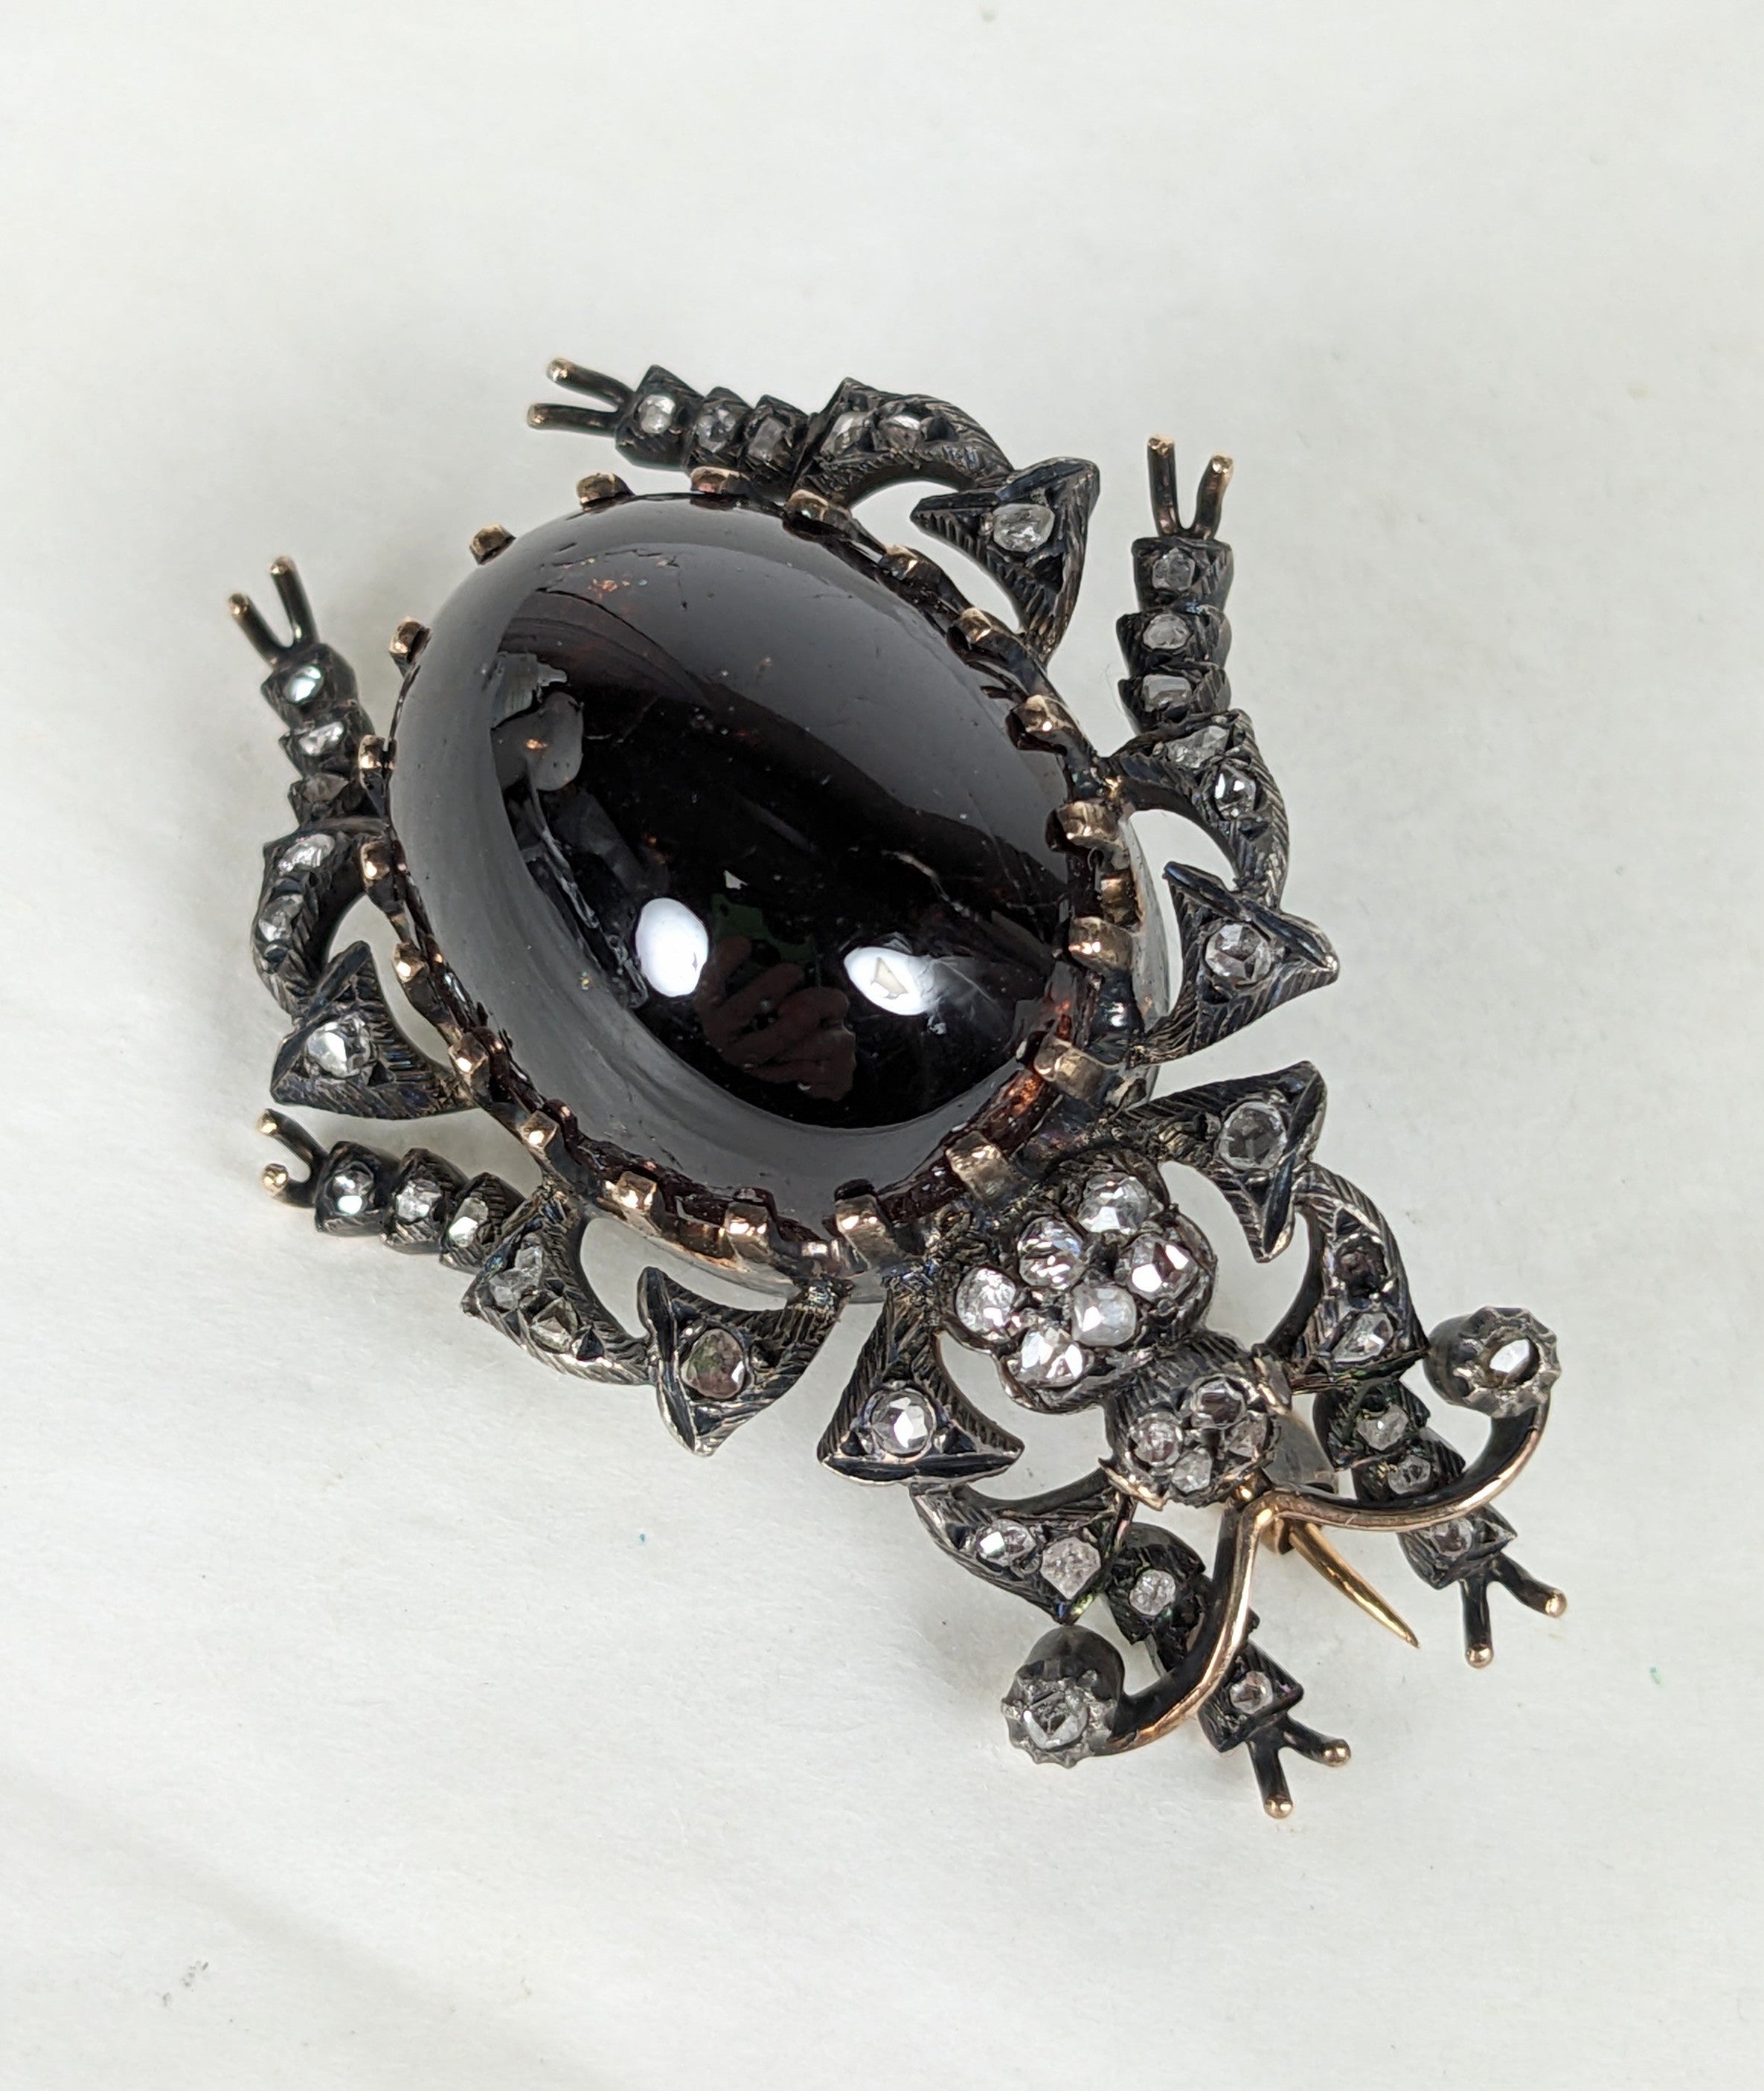 Lovely 19th Century Diamond and Carbuncle Garnet Beetle. Realistically modeled with large cabochon garnet set in high gold prongs with body elements all detailed in rose and rough cut diamonds. Set in silver topped gold as is customary for the 19th